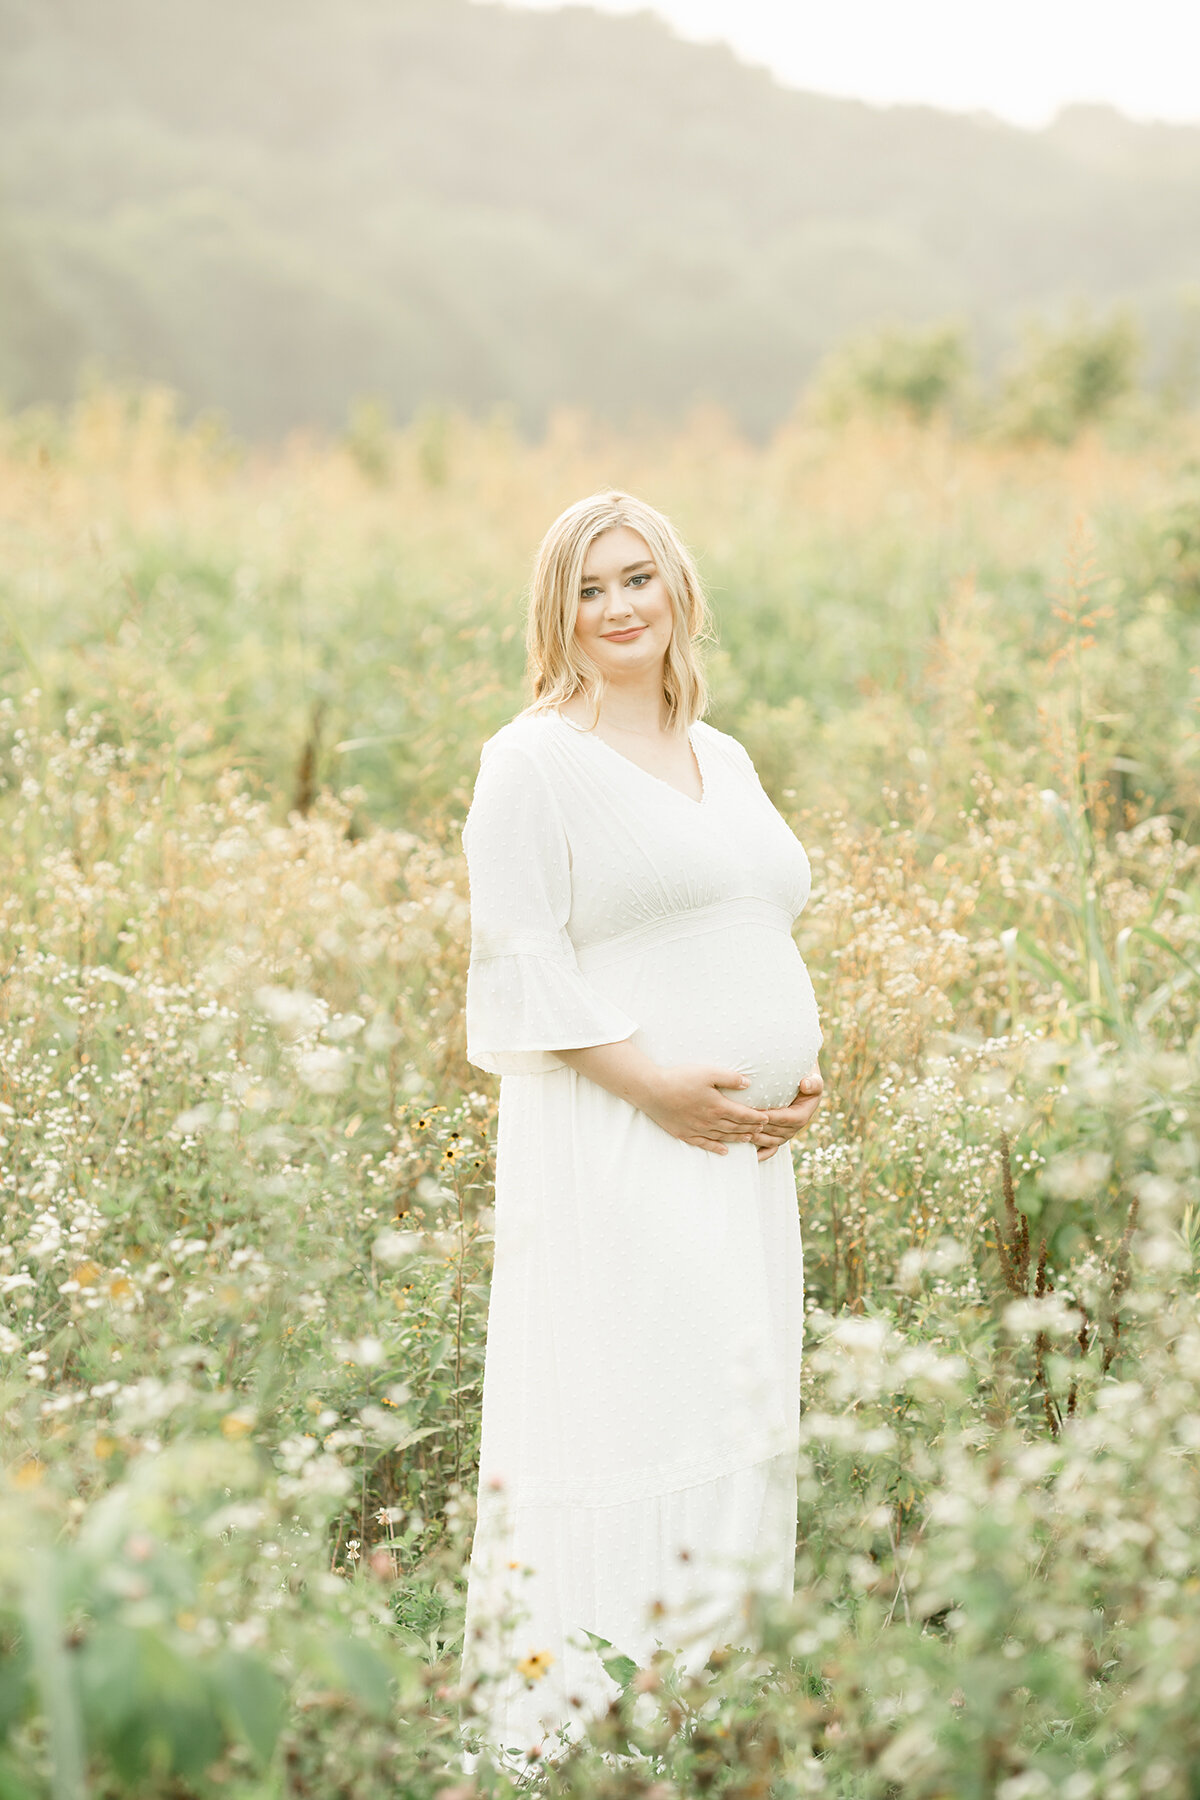 Boho maternity photo shoot in field with flowers. Perfect maternity photo shoot dress. Julie Brock Photography Louisville KY